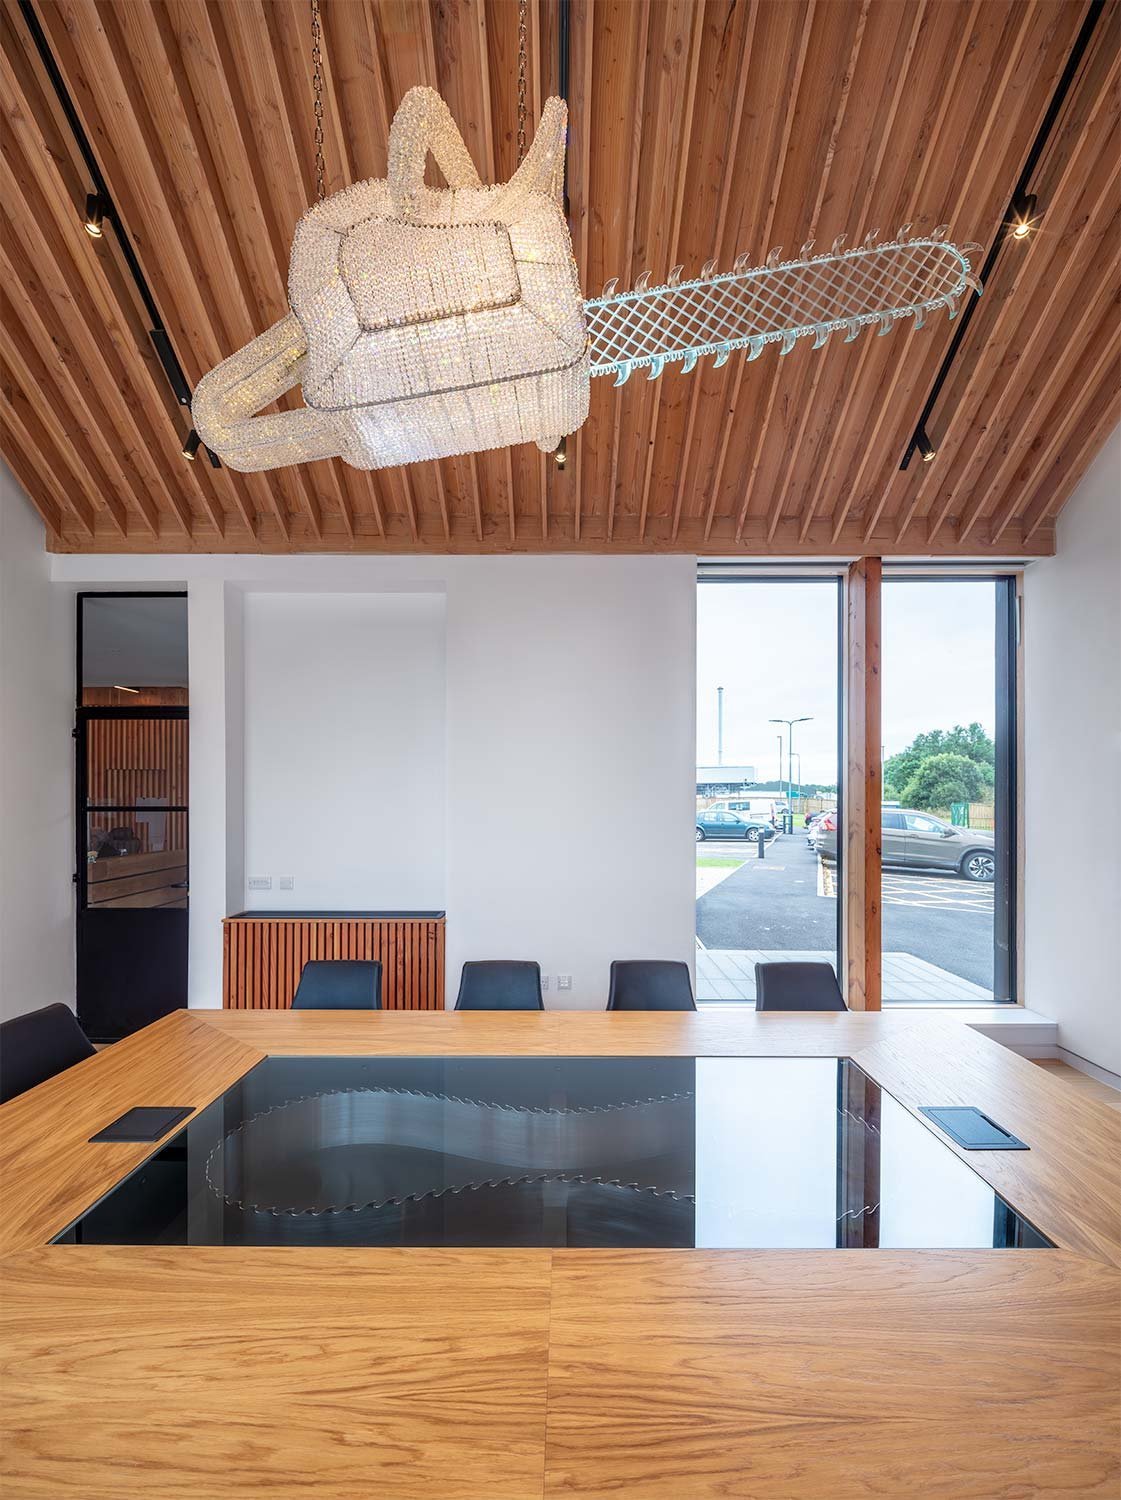 bespoke meeting room table with crystal glass chainsaw sculpture